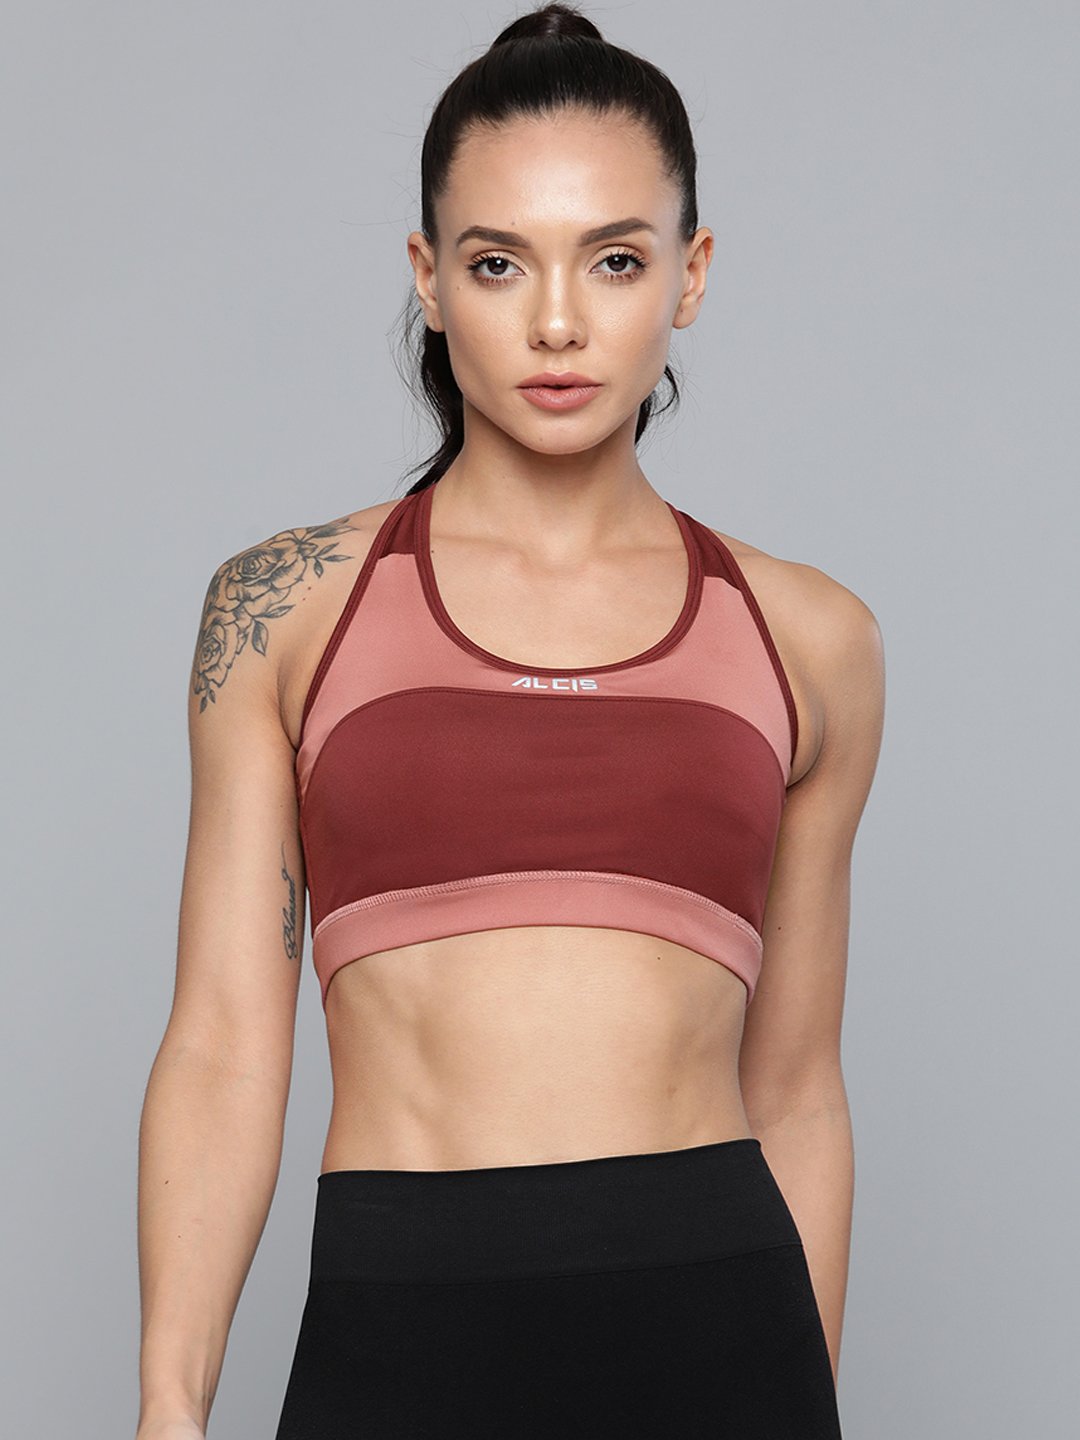 Alcis Burgundy  Pink Colourblocked Workout Bra Full Coverage Lightly Padded